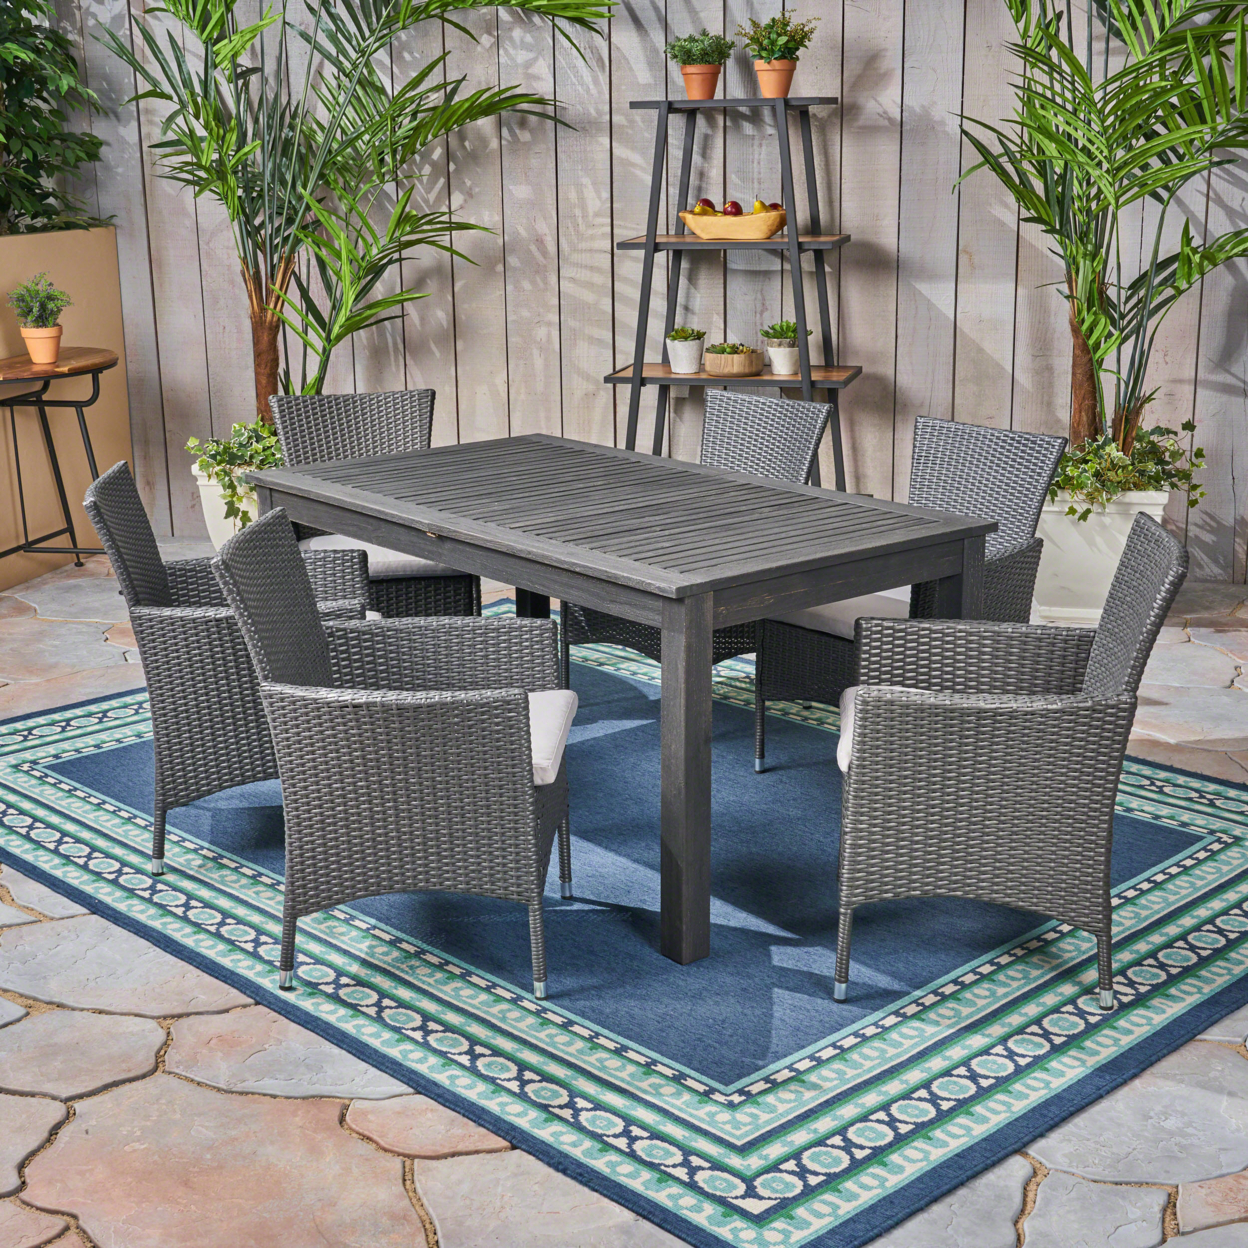 Austin Outdoor Wood And Wicker Expandable Dining Set - Dark Gray + Gray + Silver, 7-Piece Set